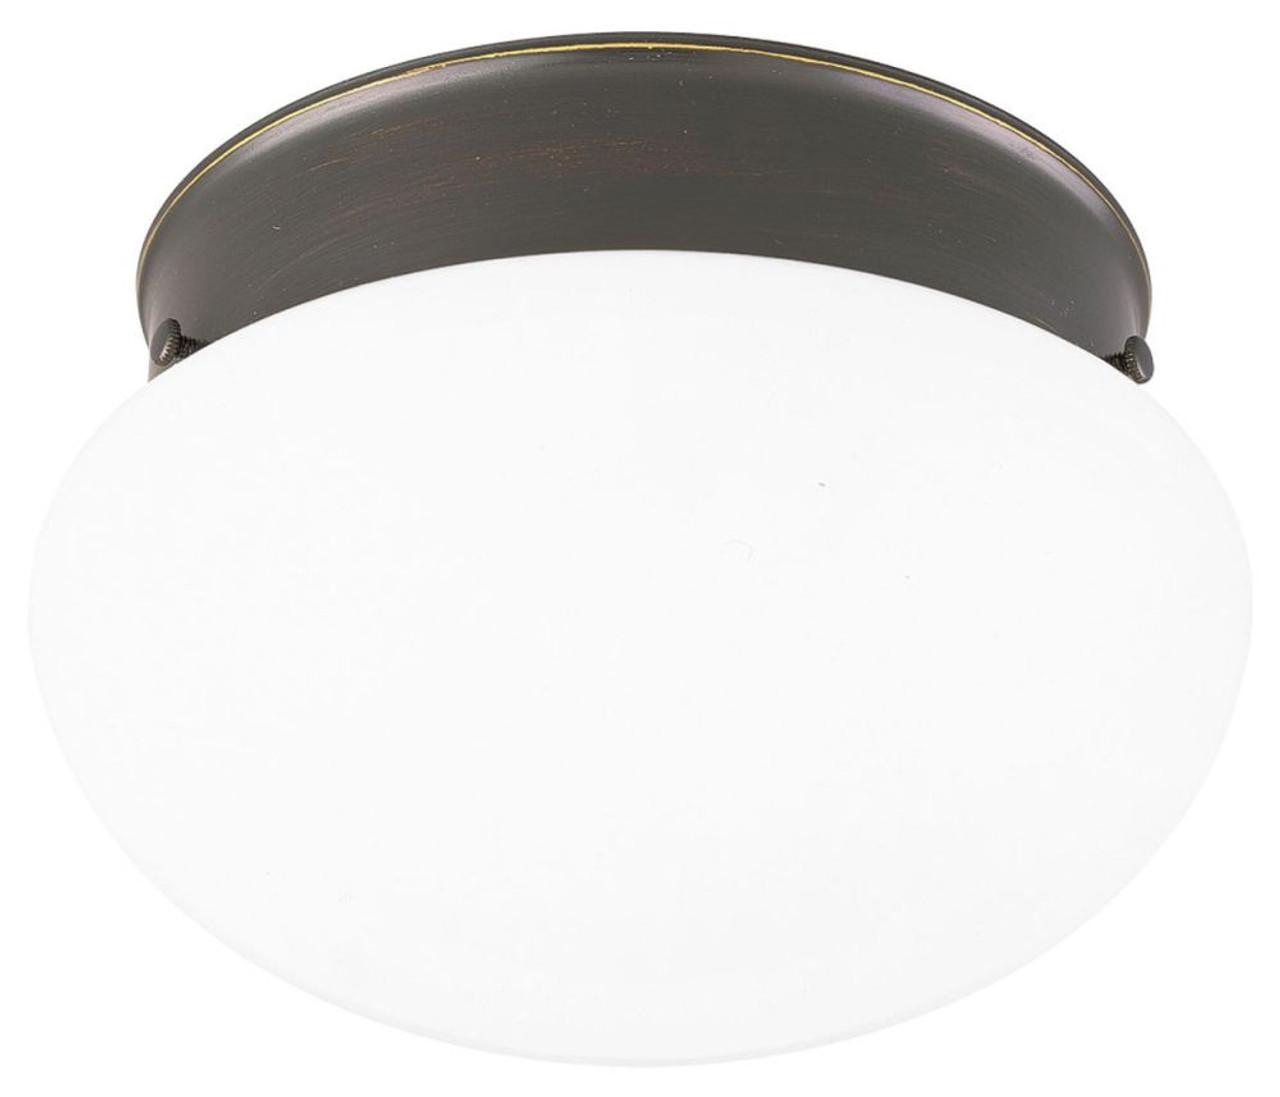 Hubbell P3410-20 A traditional two-light close-to-ceiling fixture featuring a White glass bowl and an Antique Bronze finish. The fixture is ideal in a bathroom setting or hall/foyer.  ; Antique Bronze finish. ; White glass bowl. ; Steel construction. ; Requires two (2) 60